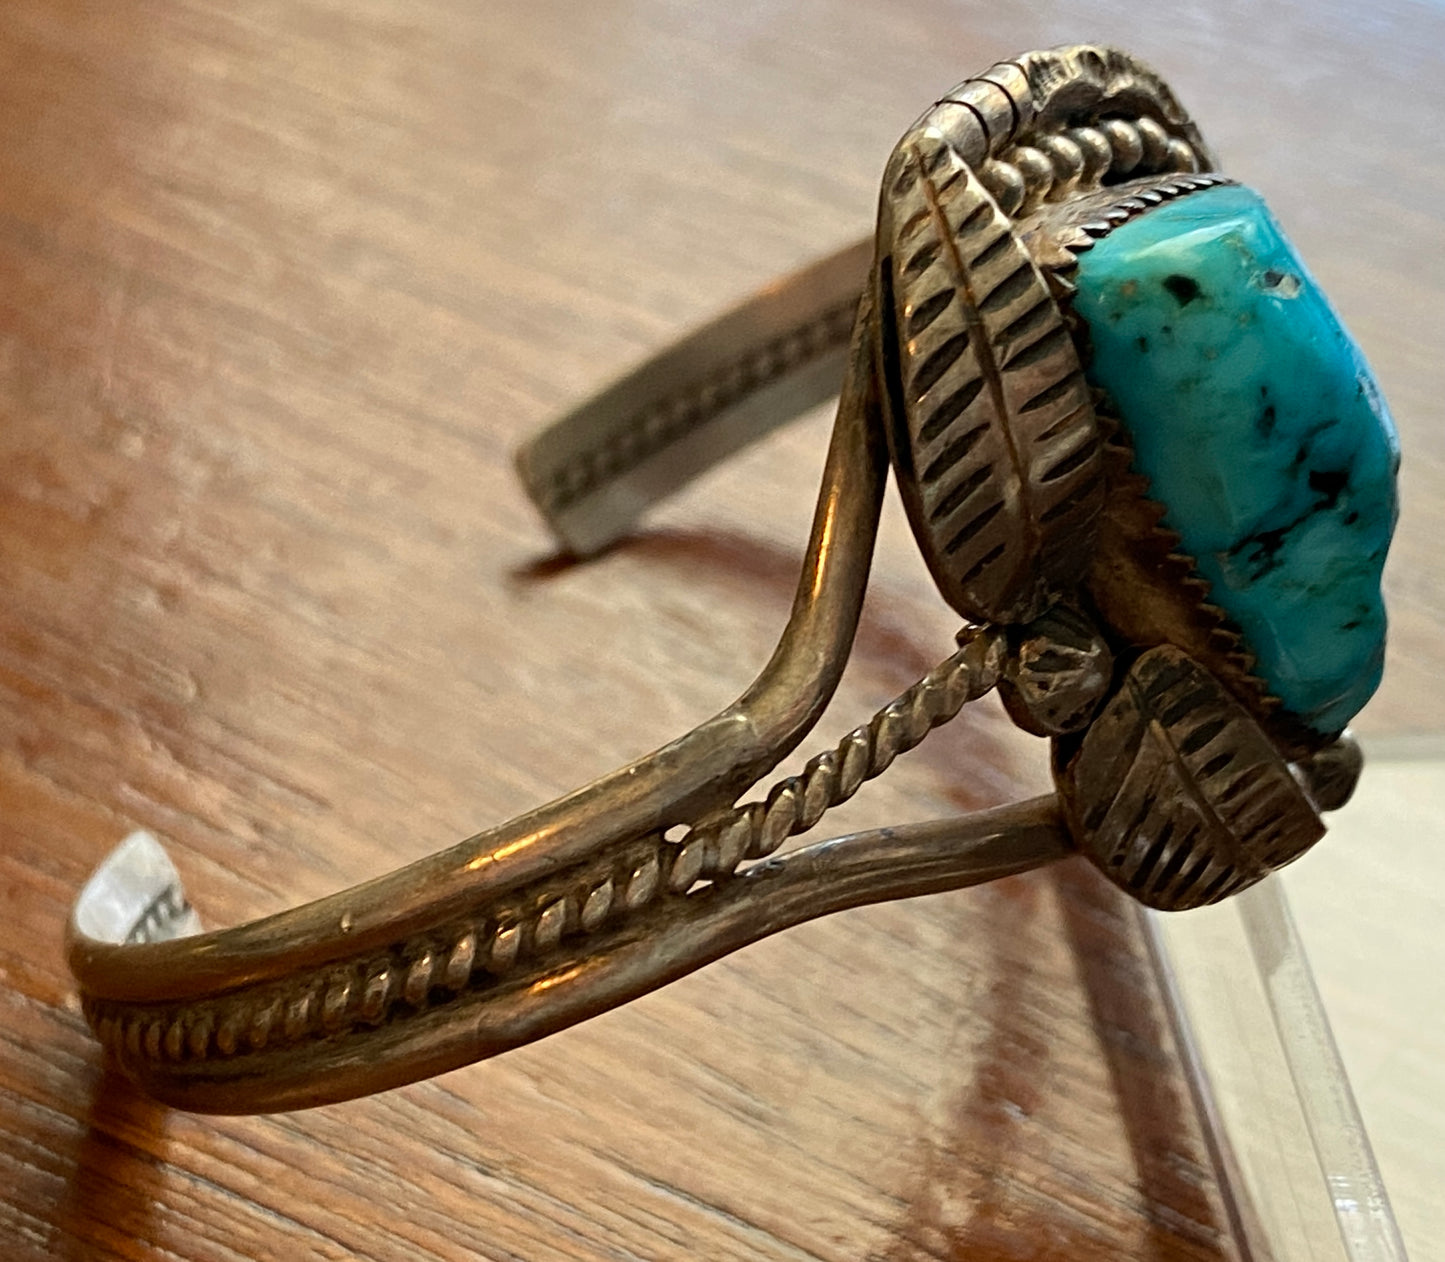 Vintage Old Pawn Silver Turquoise Cuff Bracelet